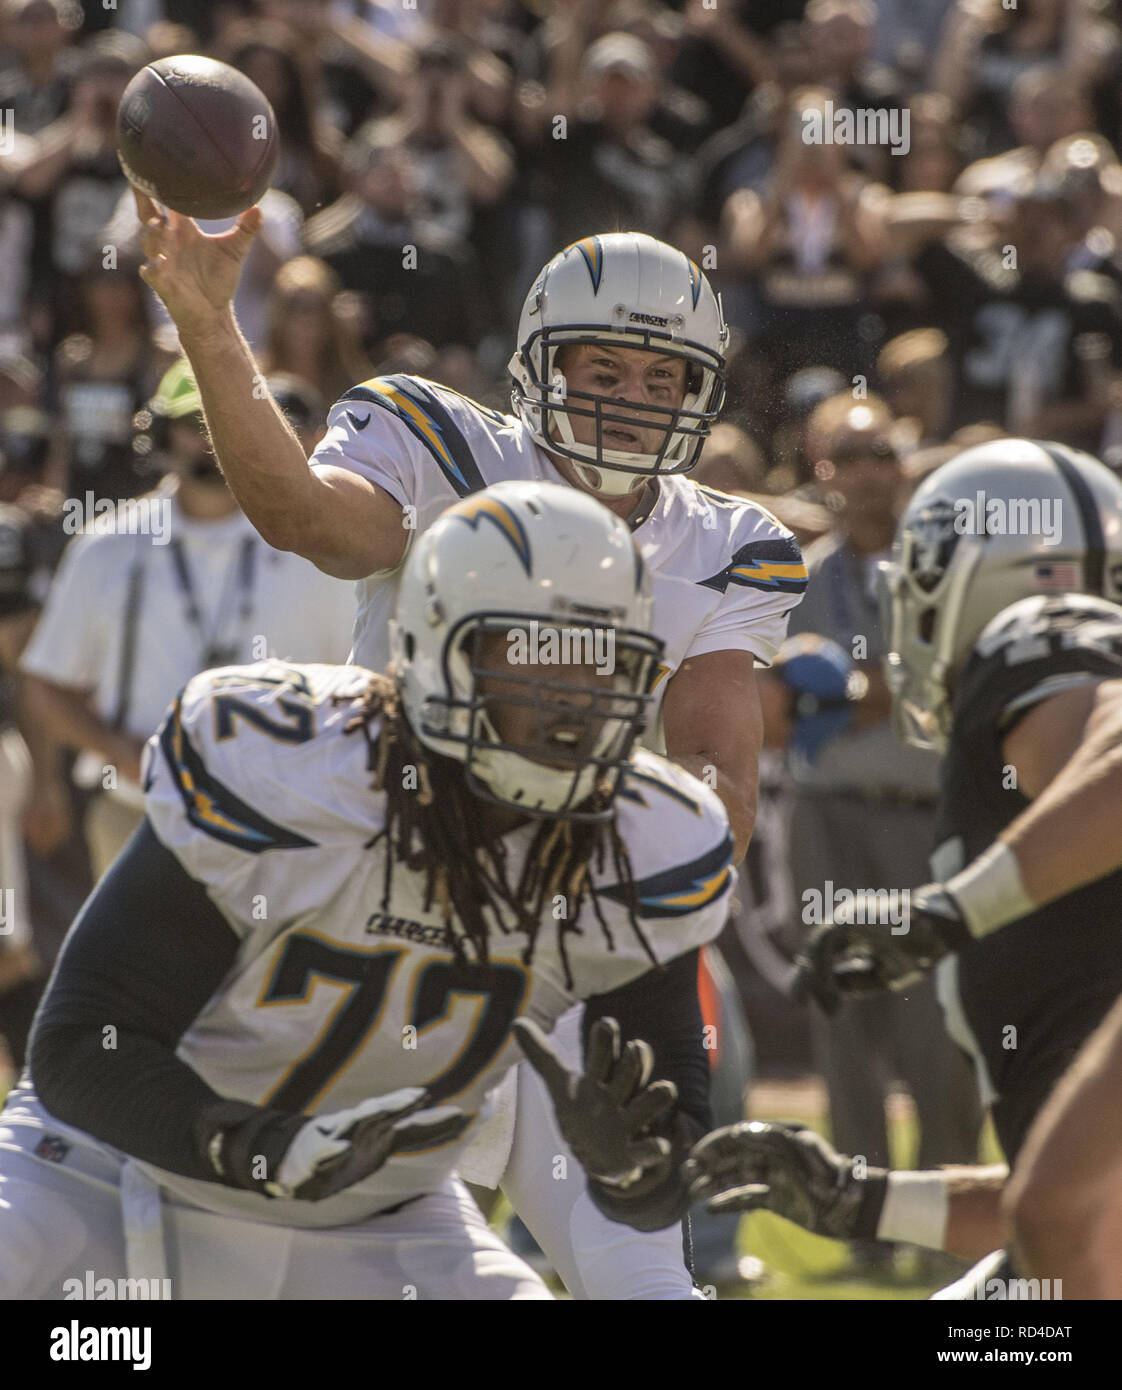 October 15, 2017 - Oakland, California, U.S - Los Angeles Chargers quarterback Philip Rivers (17) fires pass downfield on Sunday, October 15, 2017, at Oakland-Alameda County Coliseum in Oakland, California.  The Chargers defeated the Raiders 17-16. (Credit Image: © Al Golub/ZUMA Wire) Stock Photo